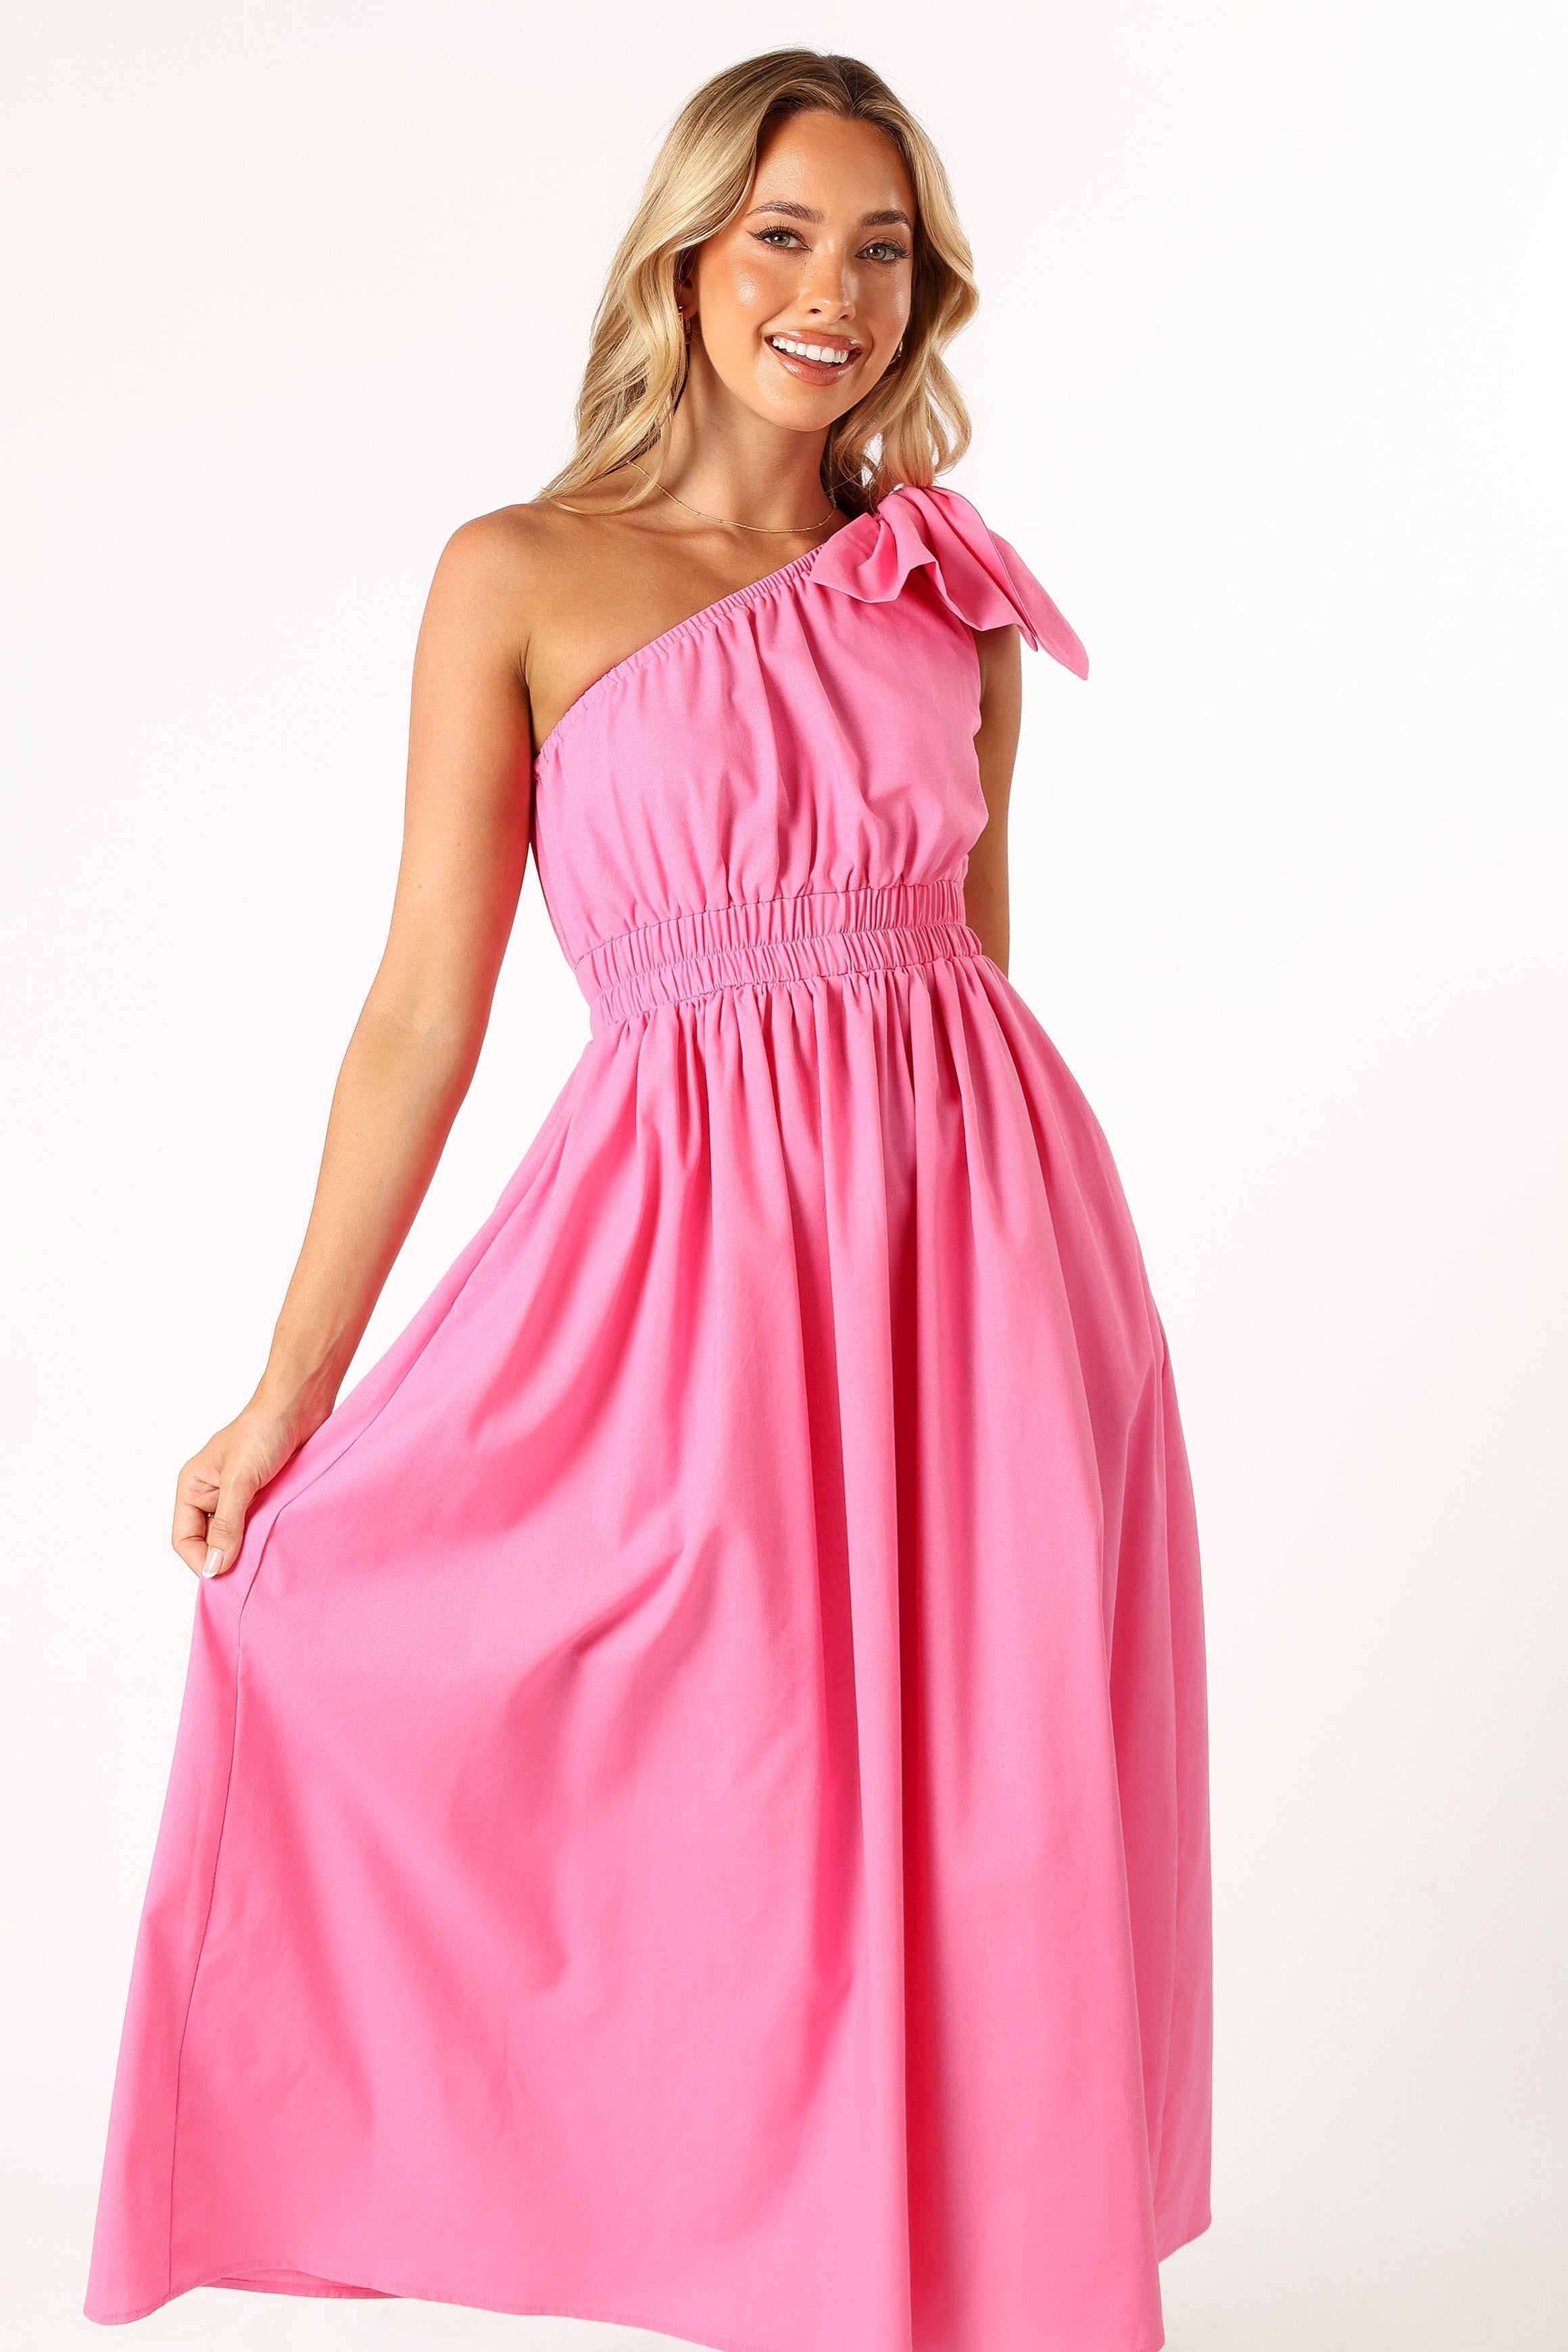 Kailey One Shoulder Maxi Dress - Hot Pink